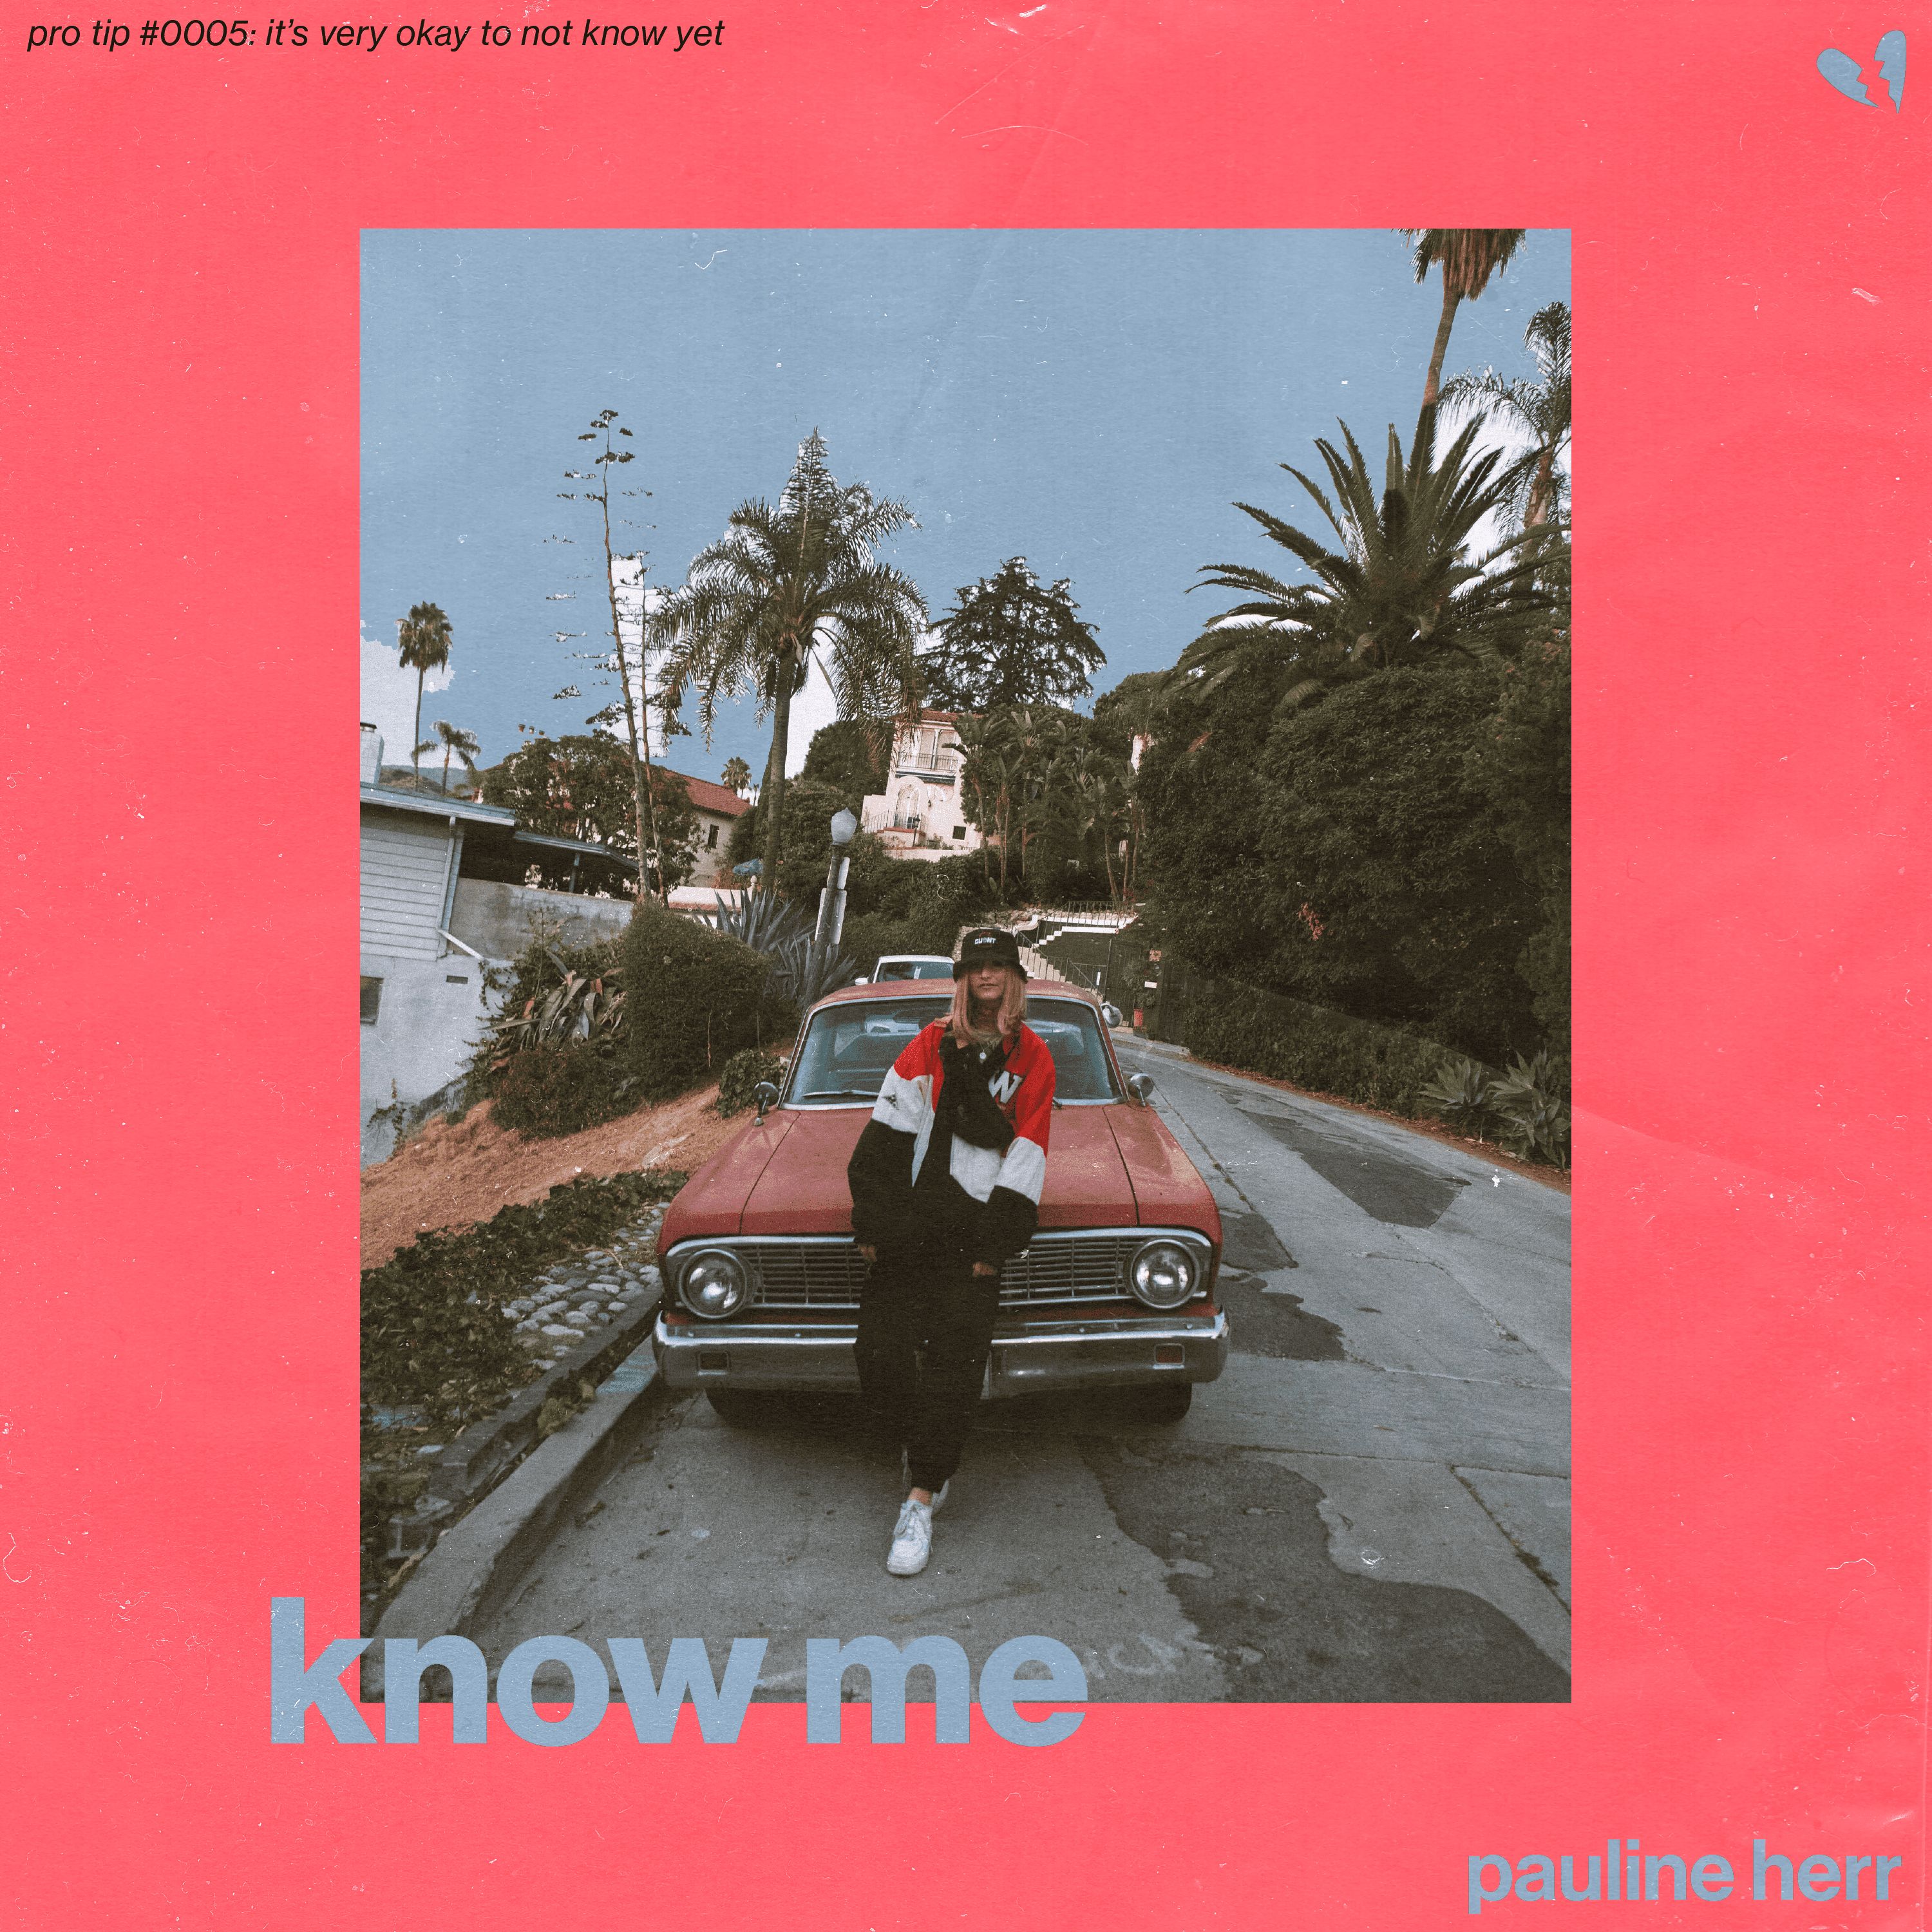 Cover art for Pauline Herr ｡･:*:･ﾟ☆'s song: Know Me